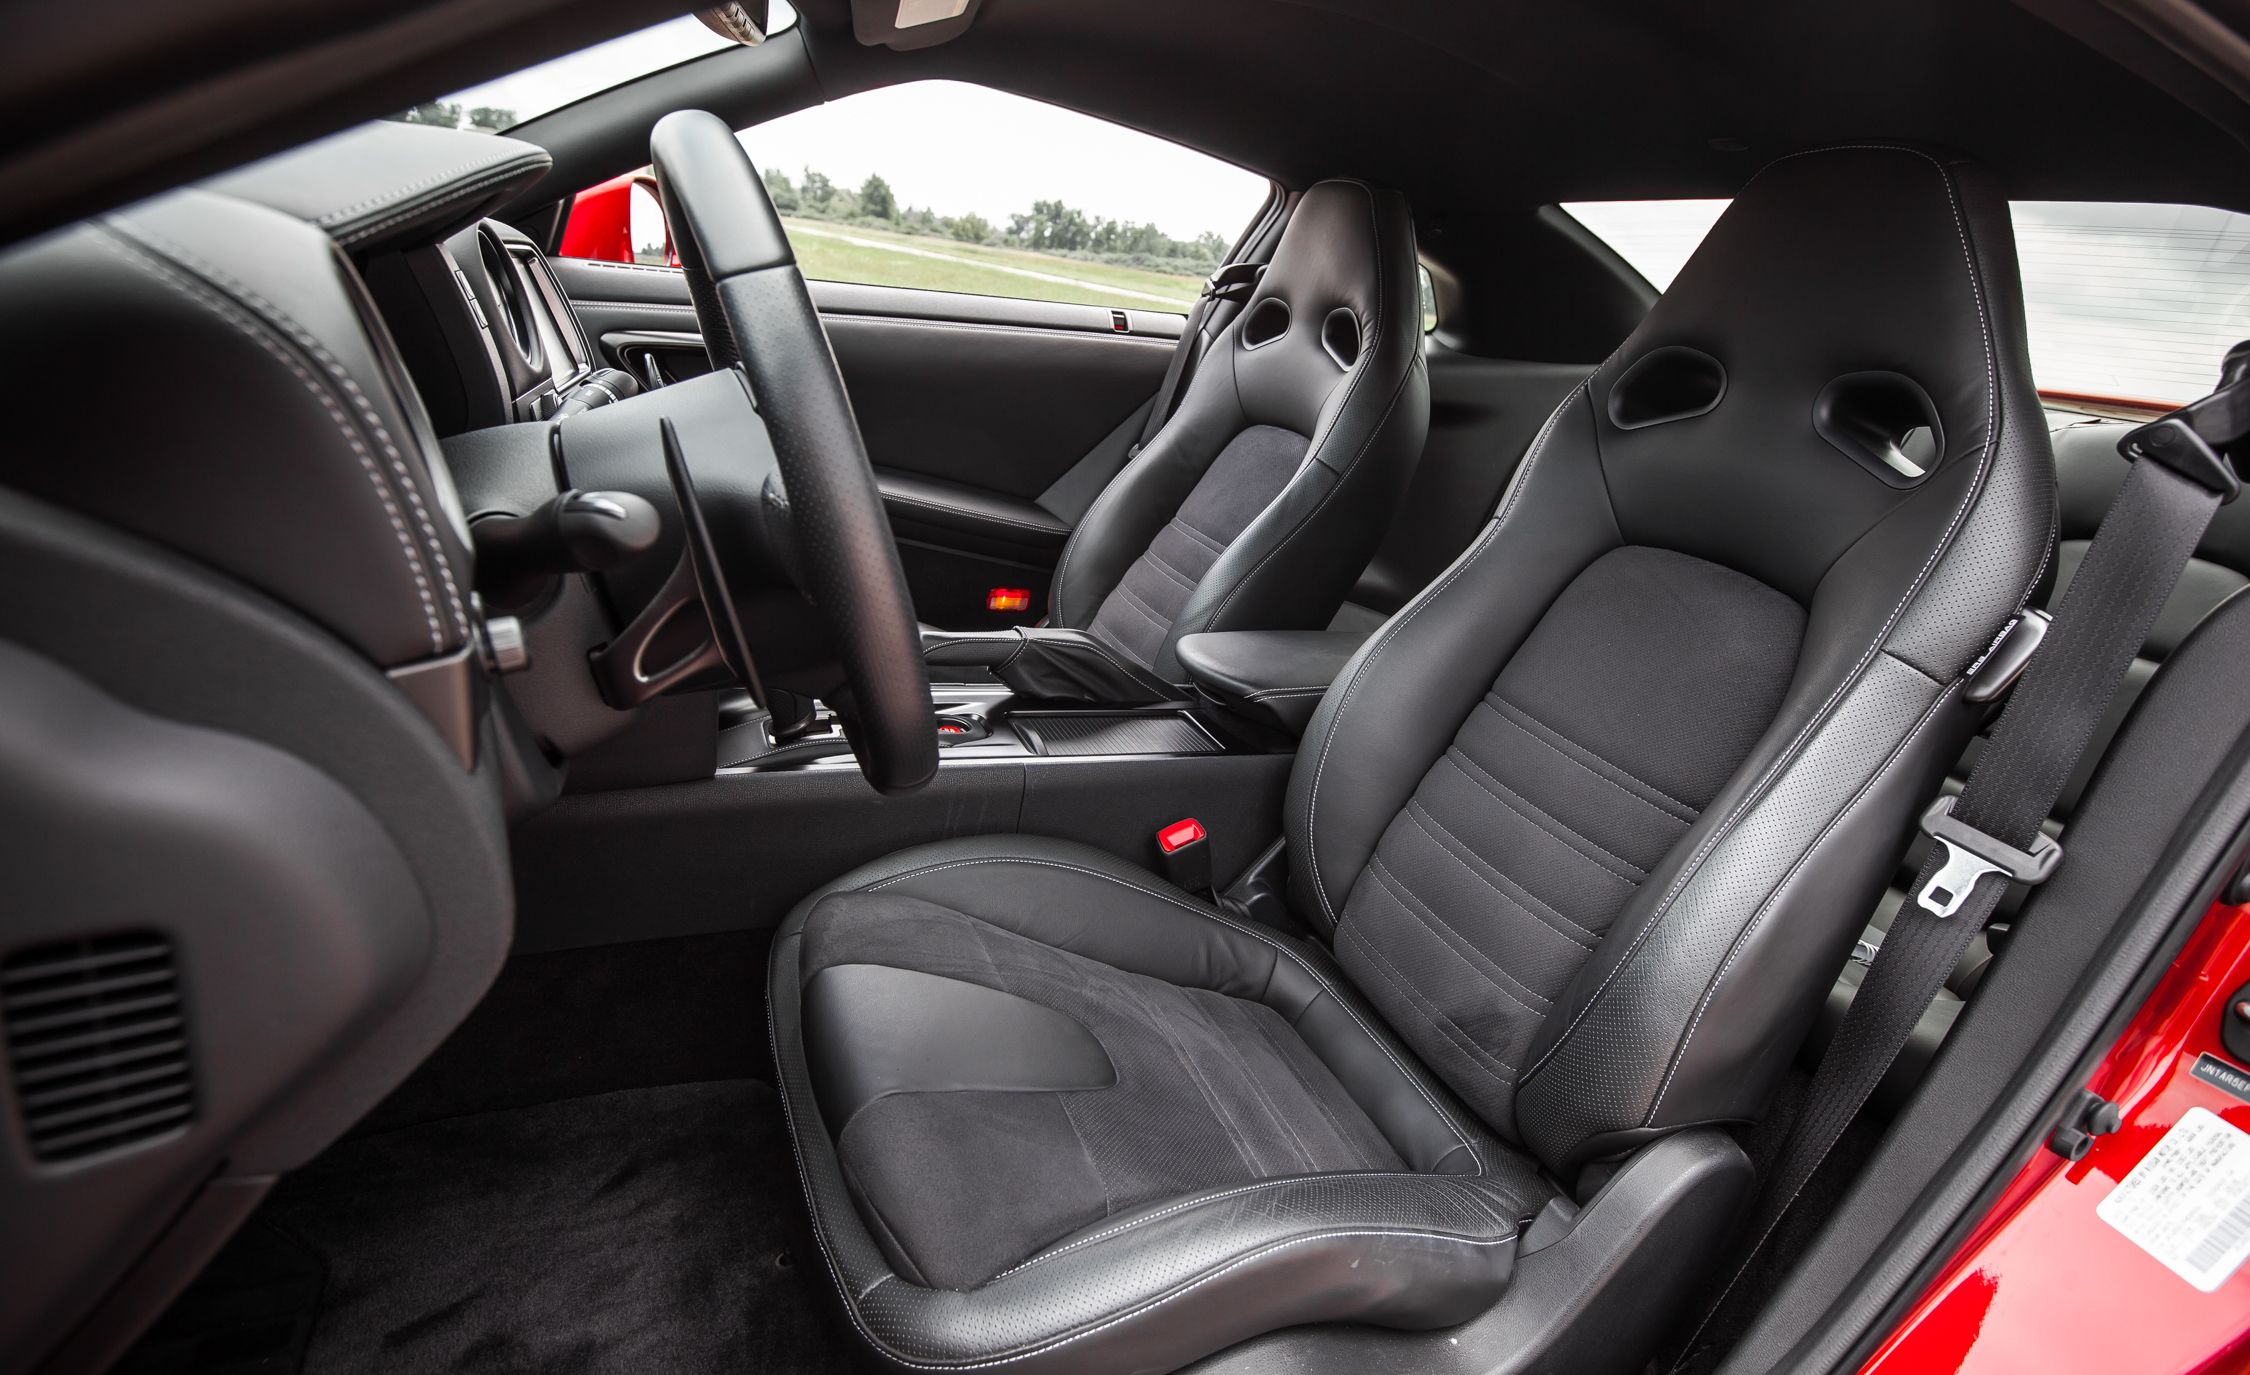 2015 Nissan Gt R Interior (View 13 of 25)